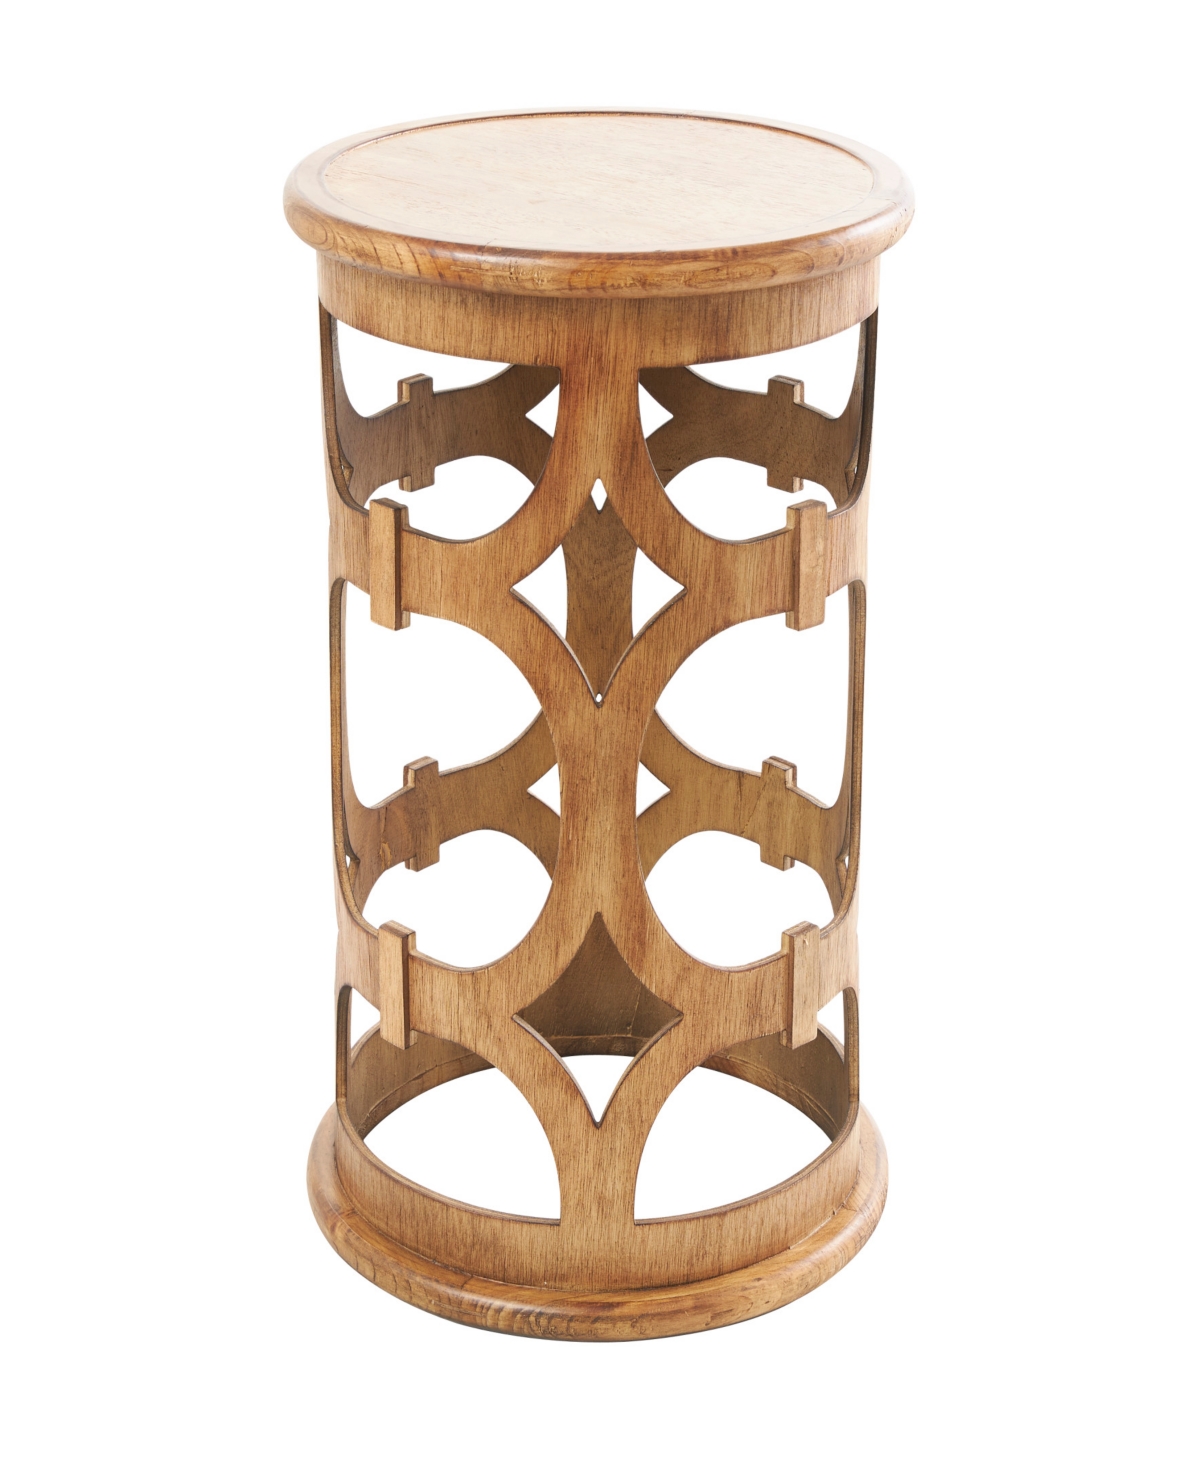 Rosemary Lane 24" Wood Open Frame With Circular Cut-outs Geometric Accent Table In Brown